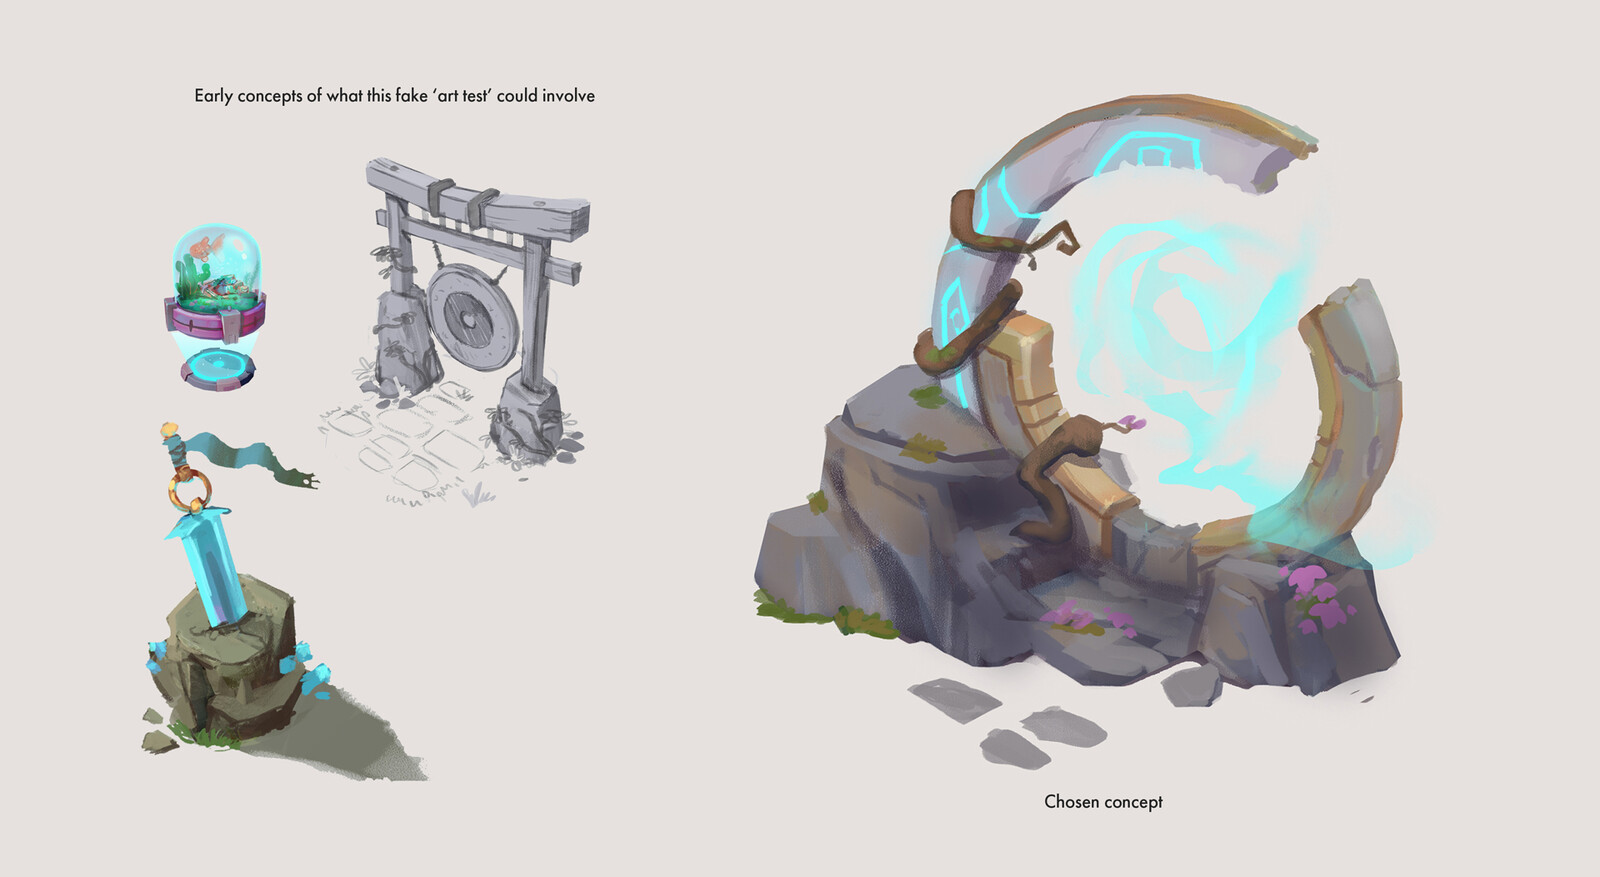 My initial concepts I painted. The idea was to create something where I had to work with metallic materials, stone materials, and organic shapes. Ultimately settled on the portal as a way of making something with enough complexity to test with